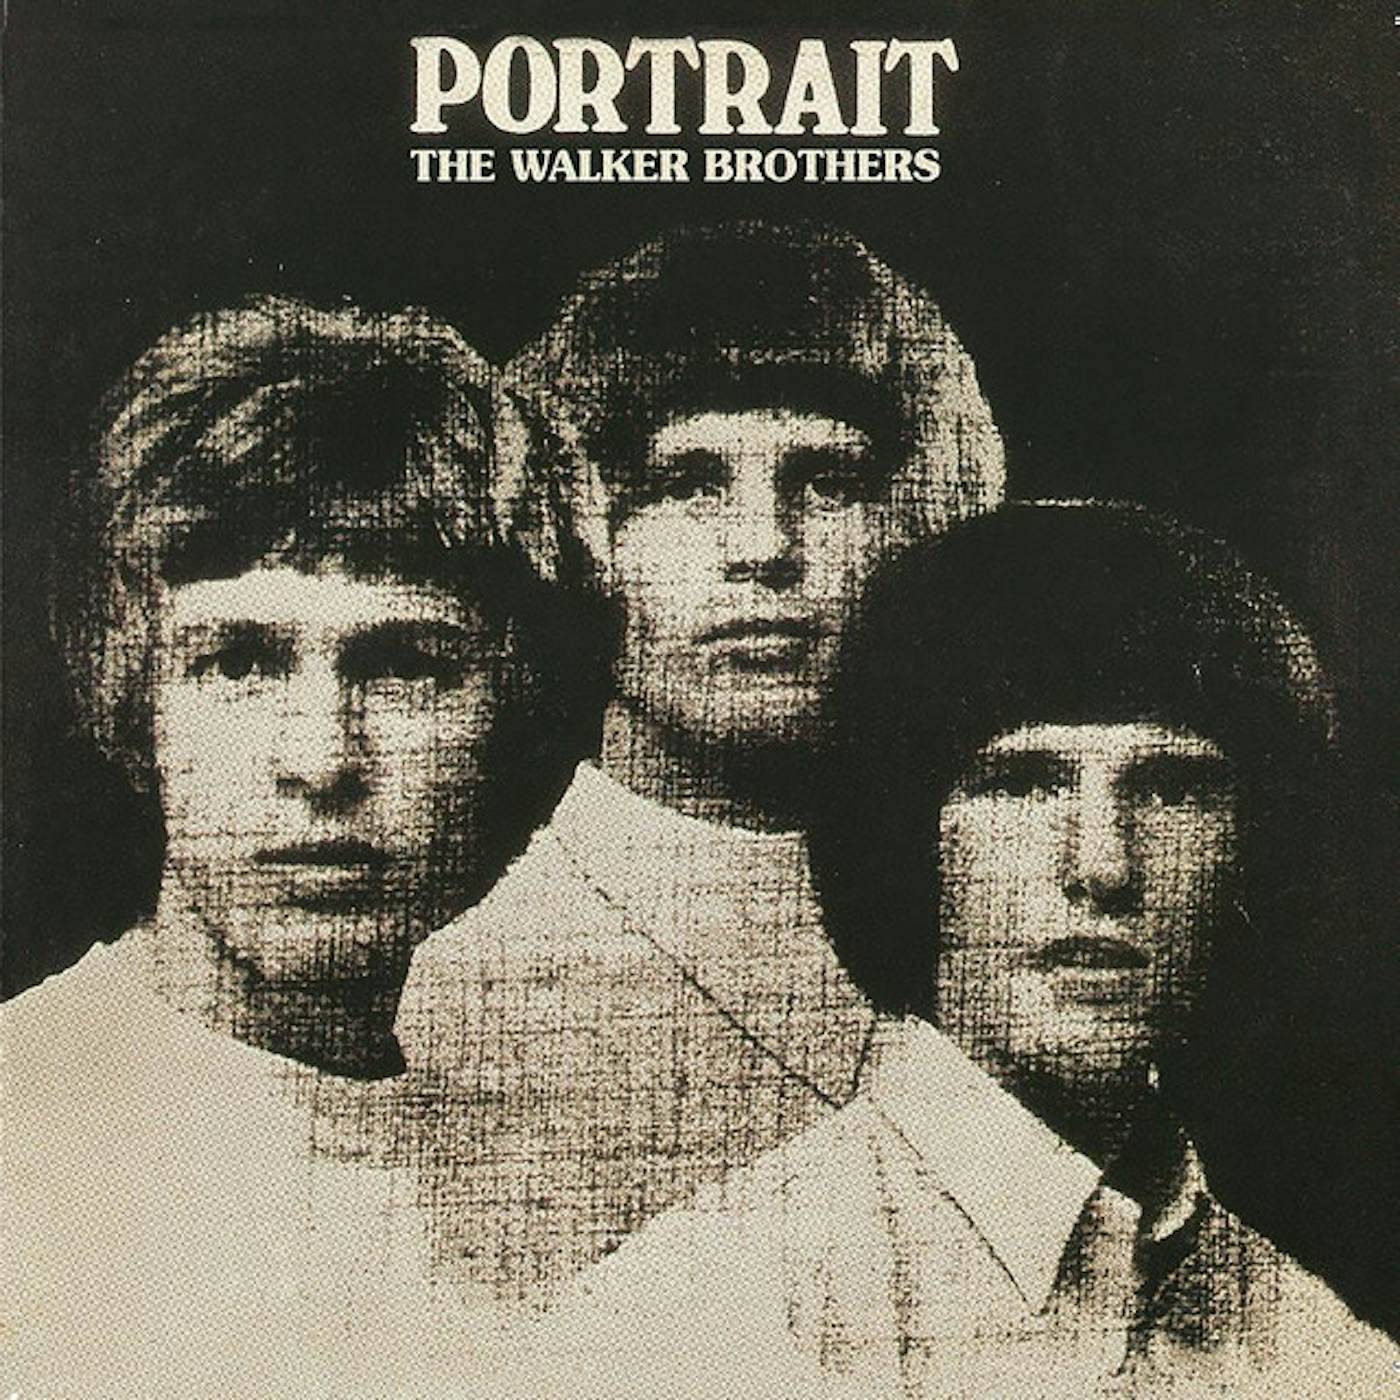 The Walker Brothers PORTRAIT CD